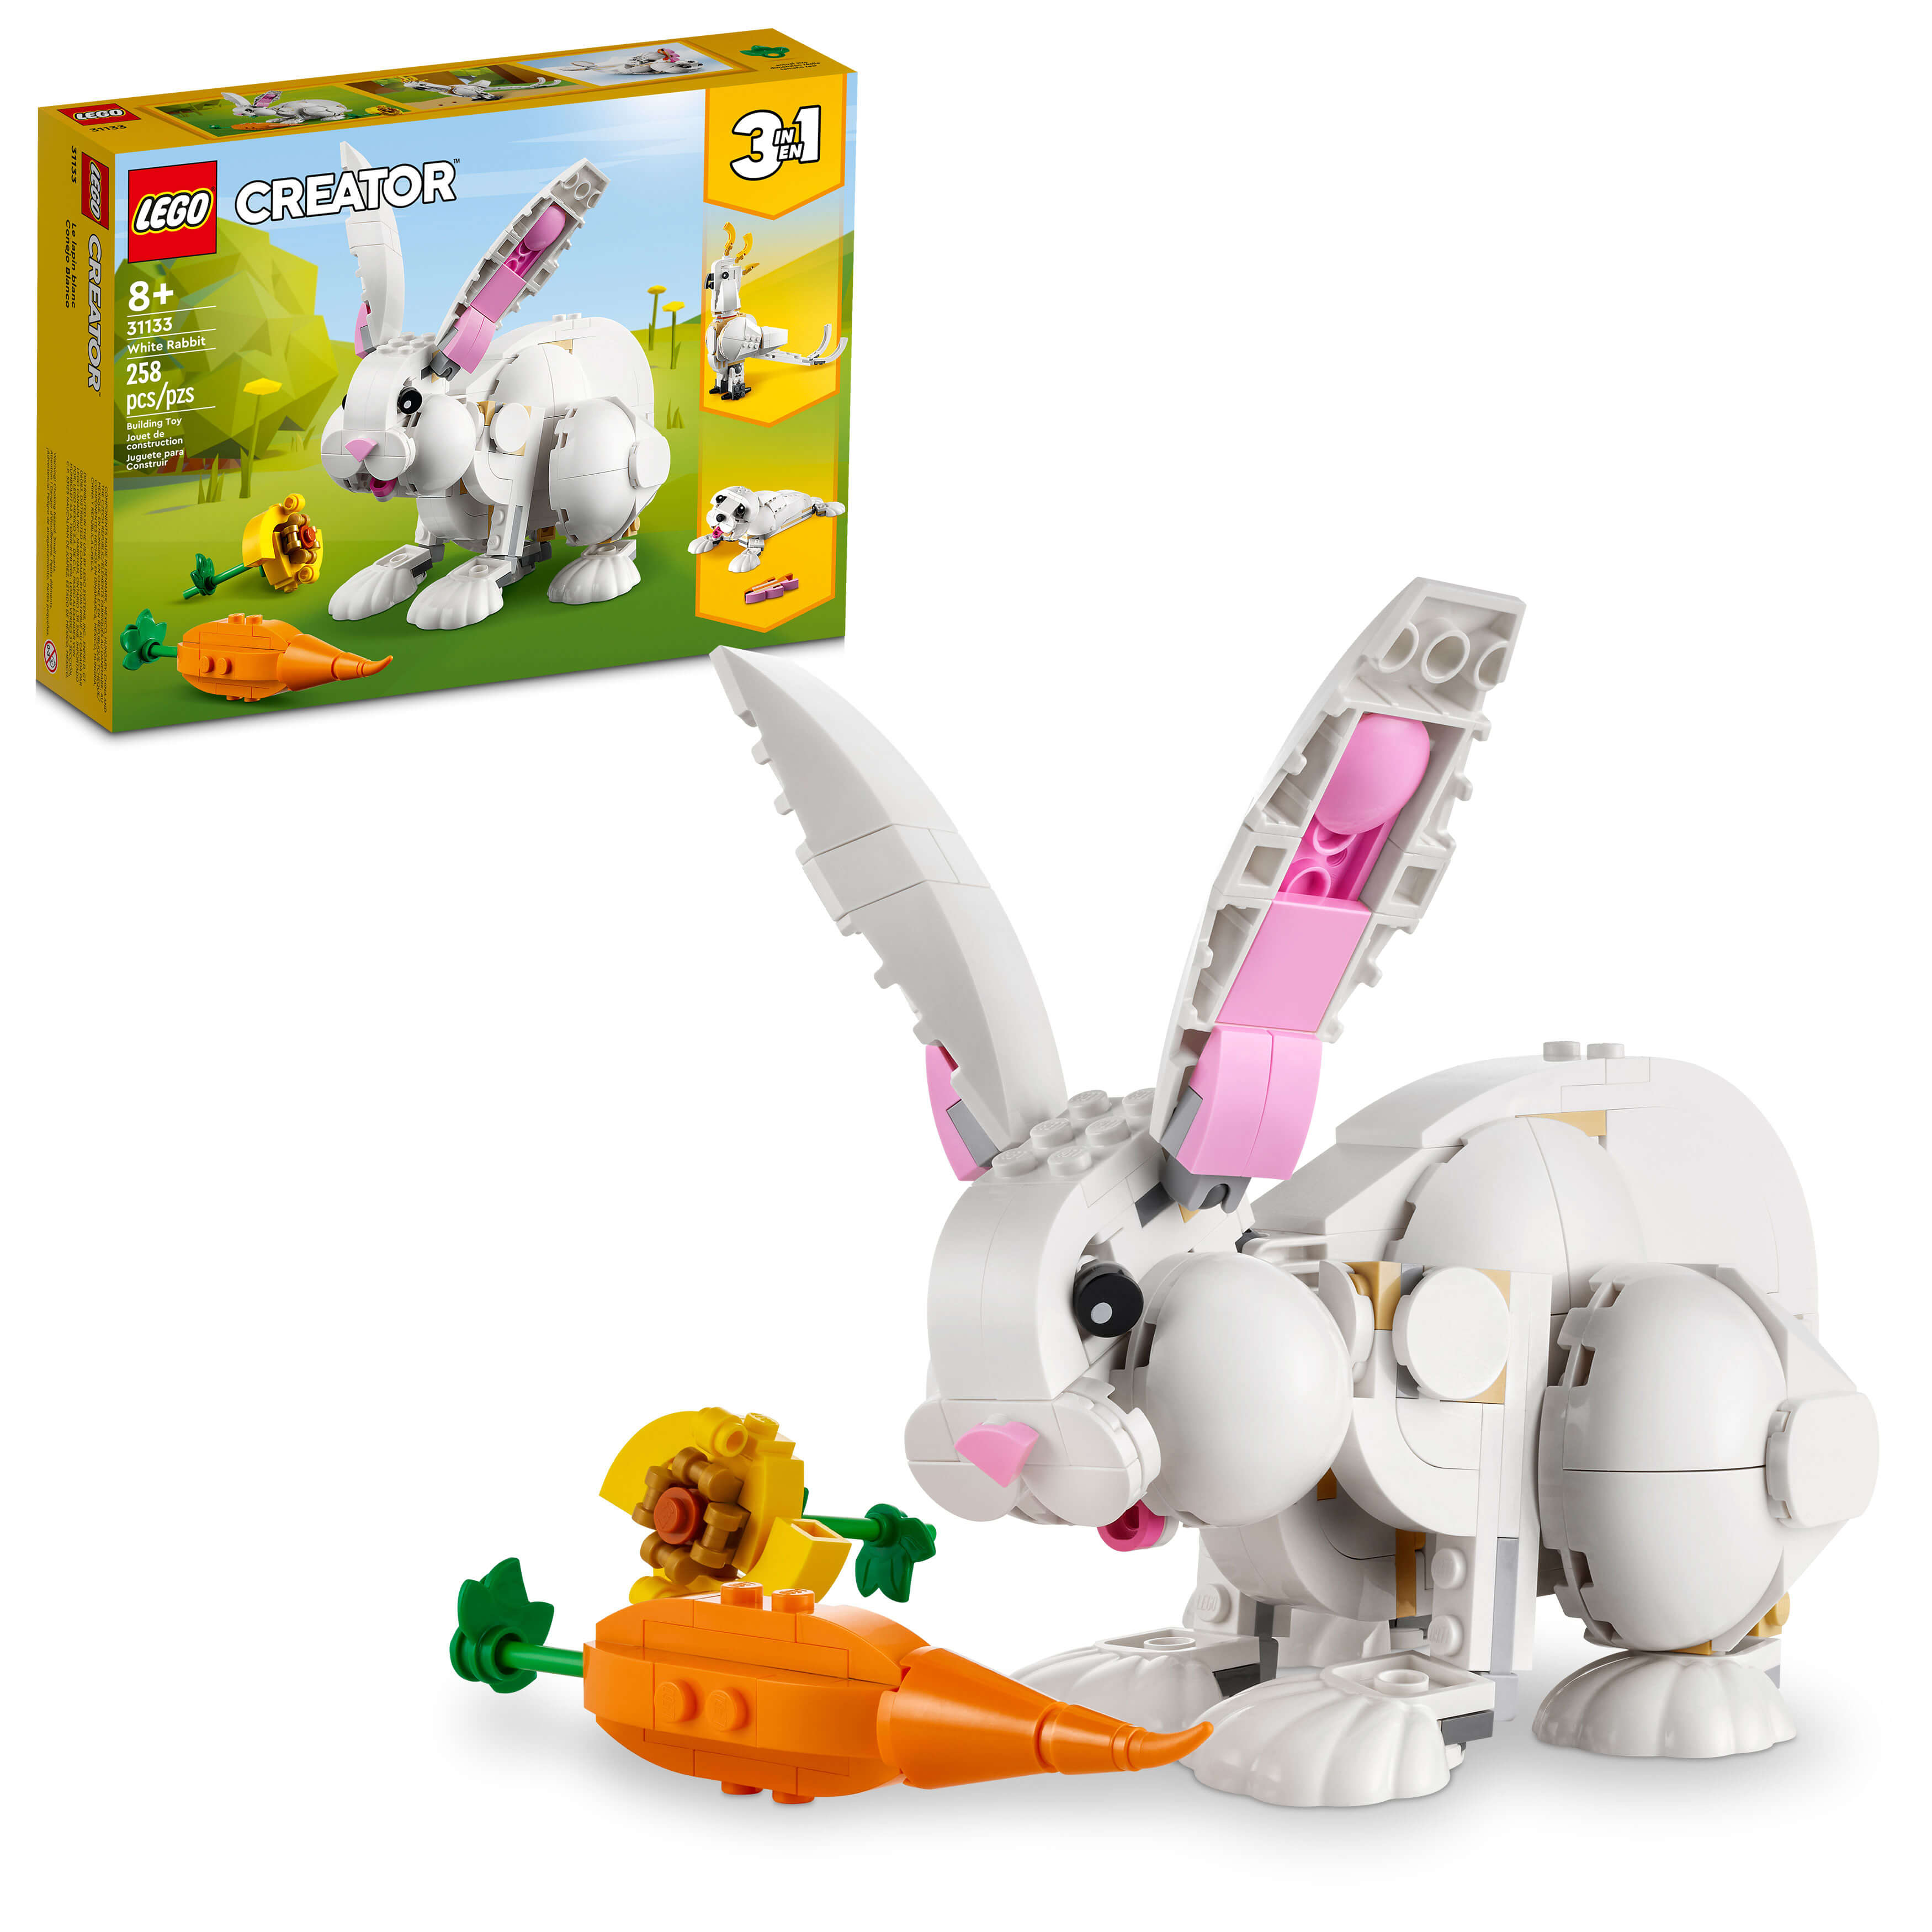 LEGO® Creator 3in1 White Rabbit 31133 Building Toy Set (258 Pieces)